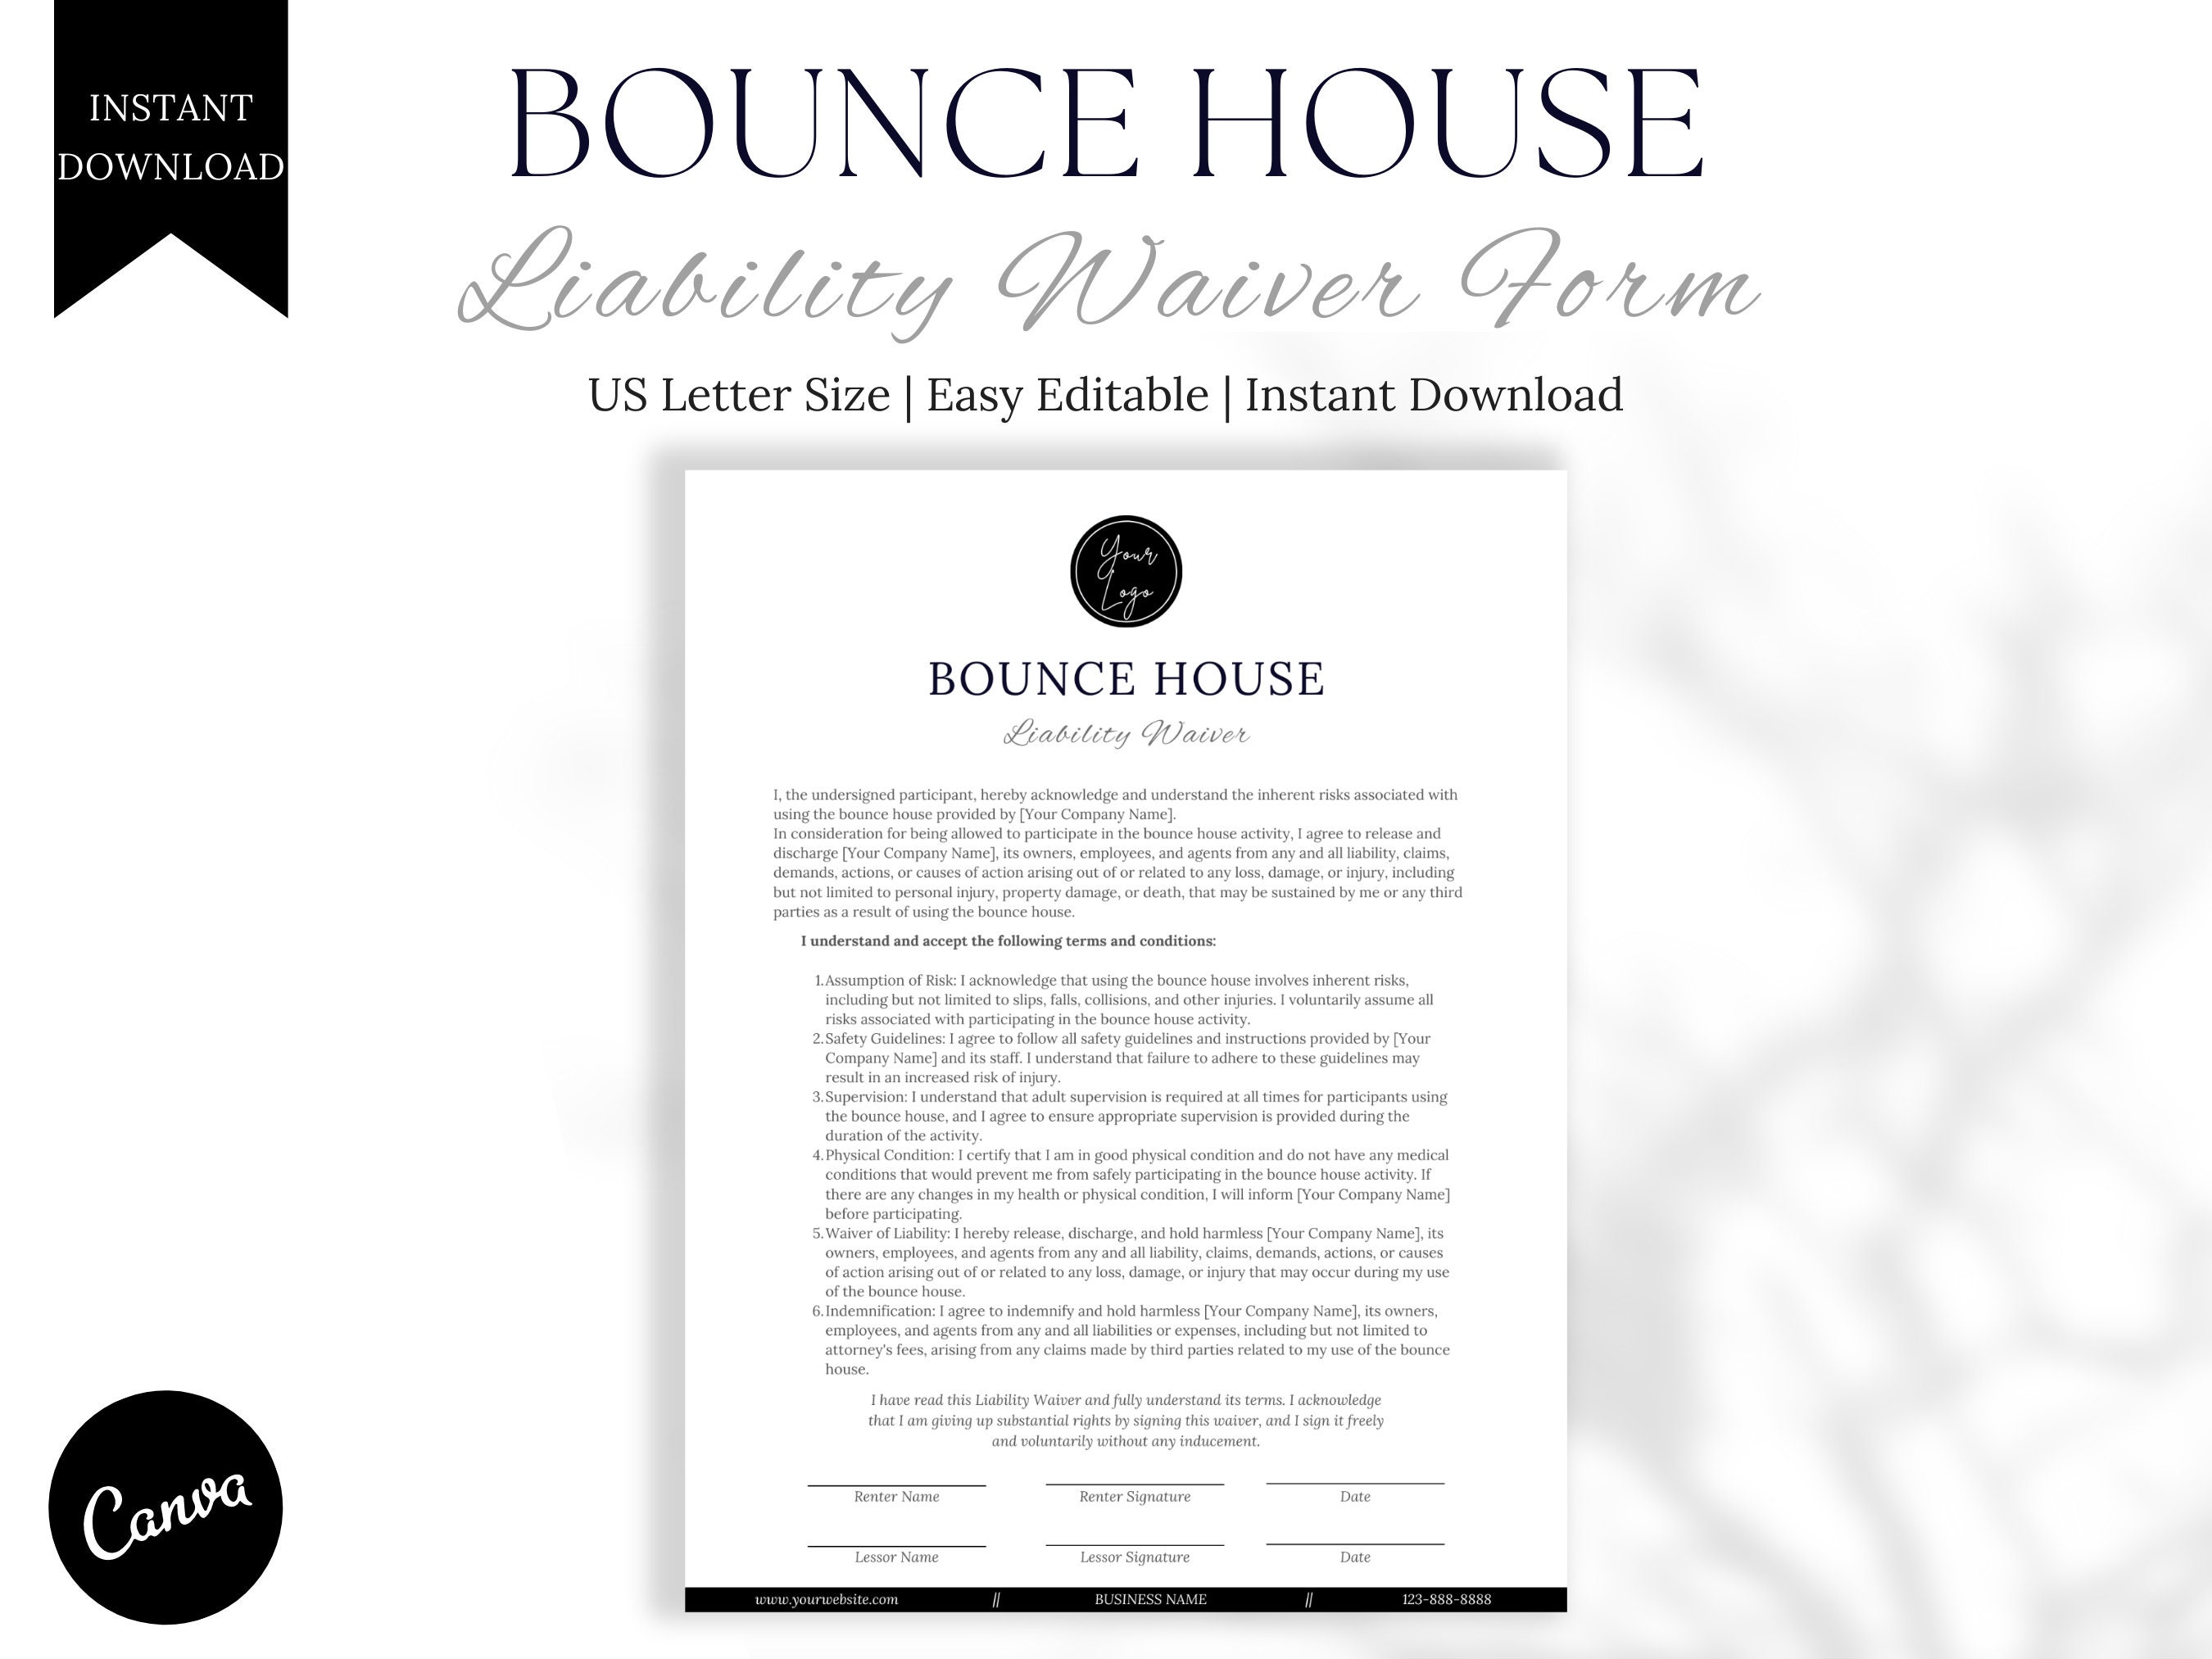 bounce-house-waiver-form-release-of-liability-template-etsy